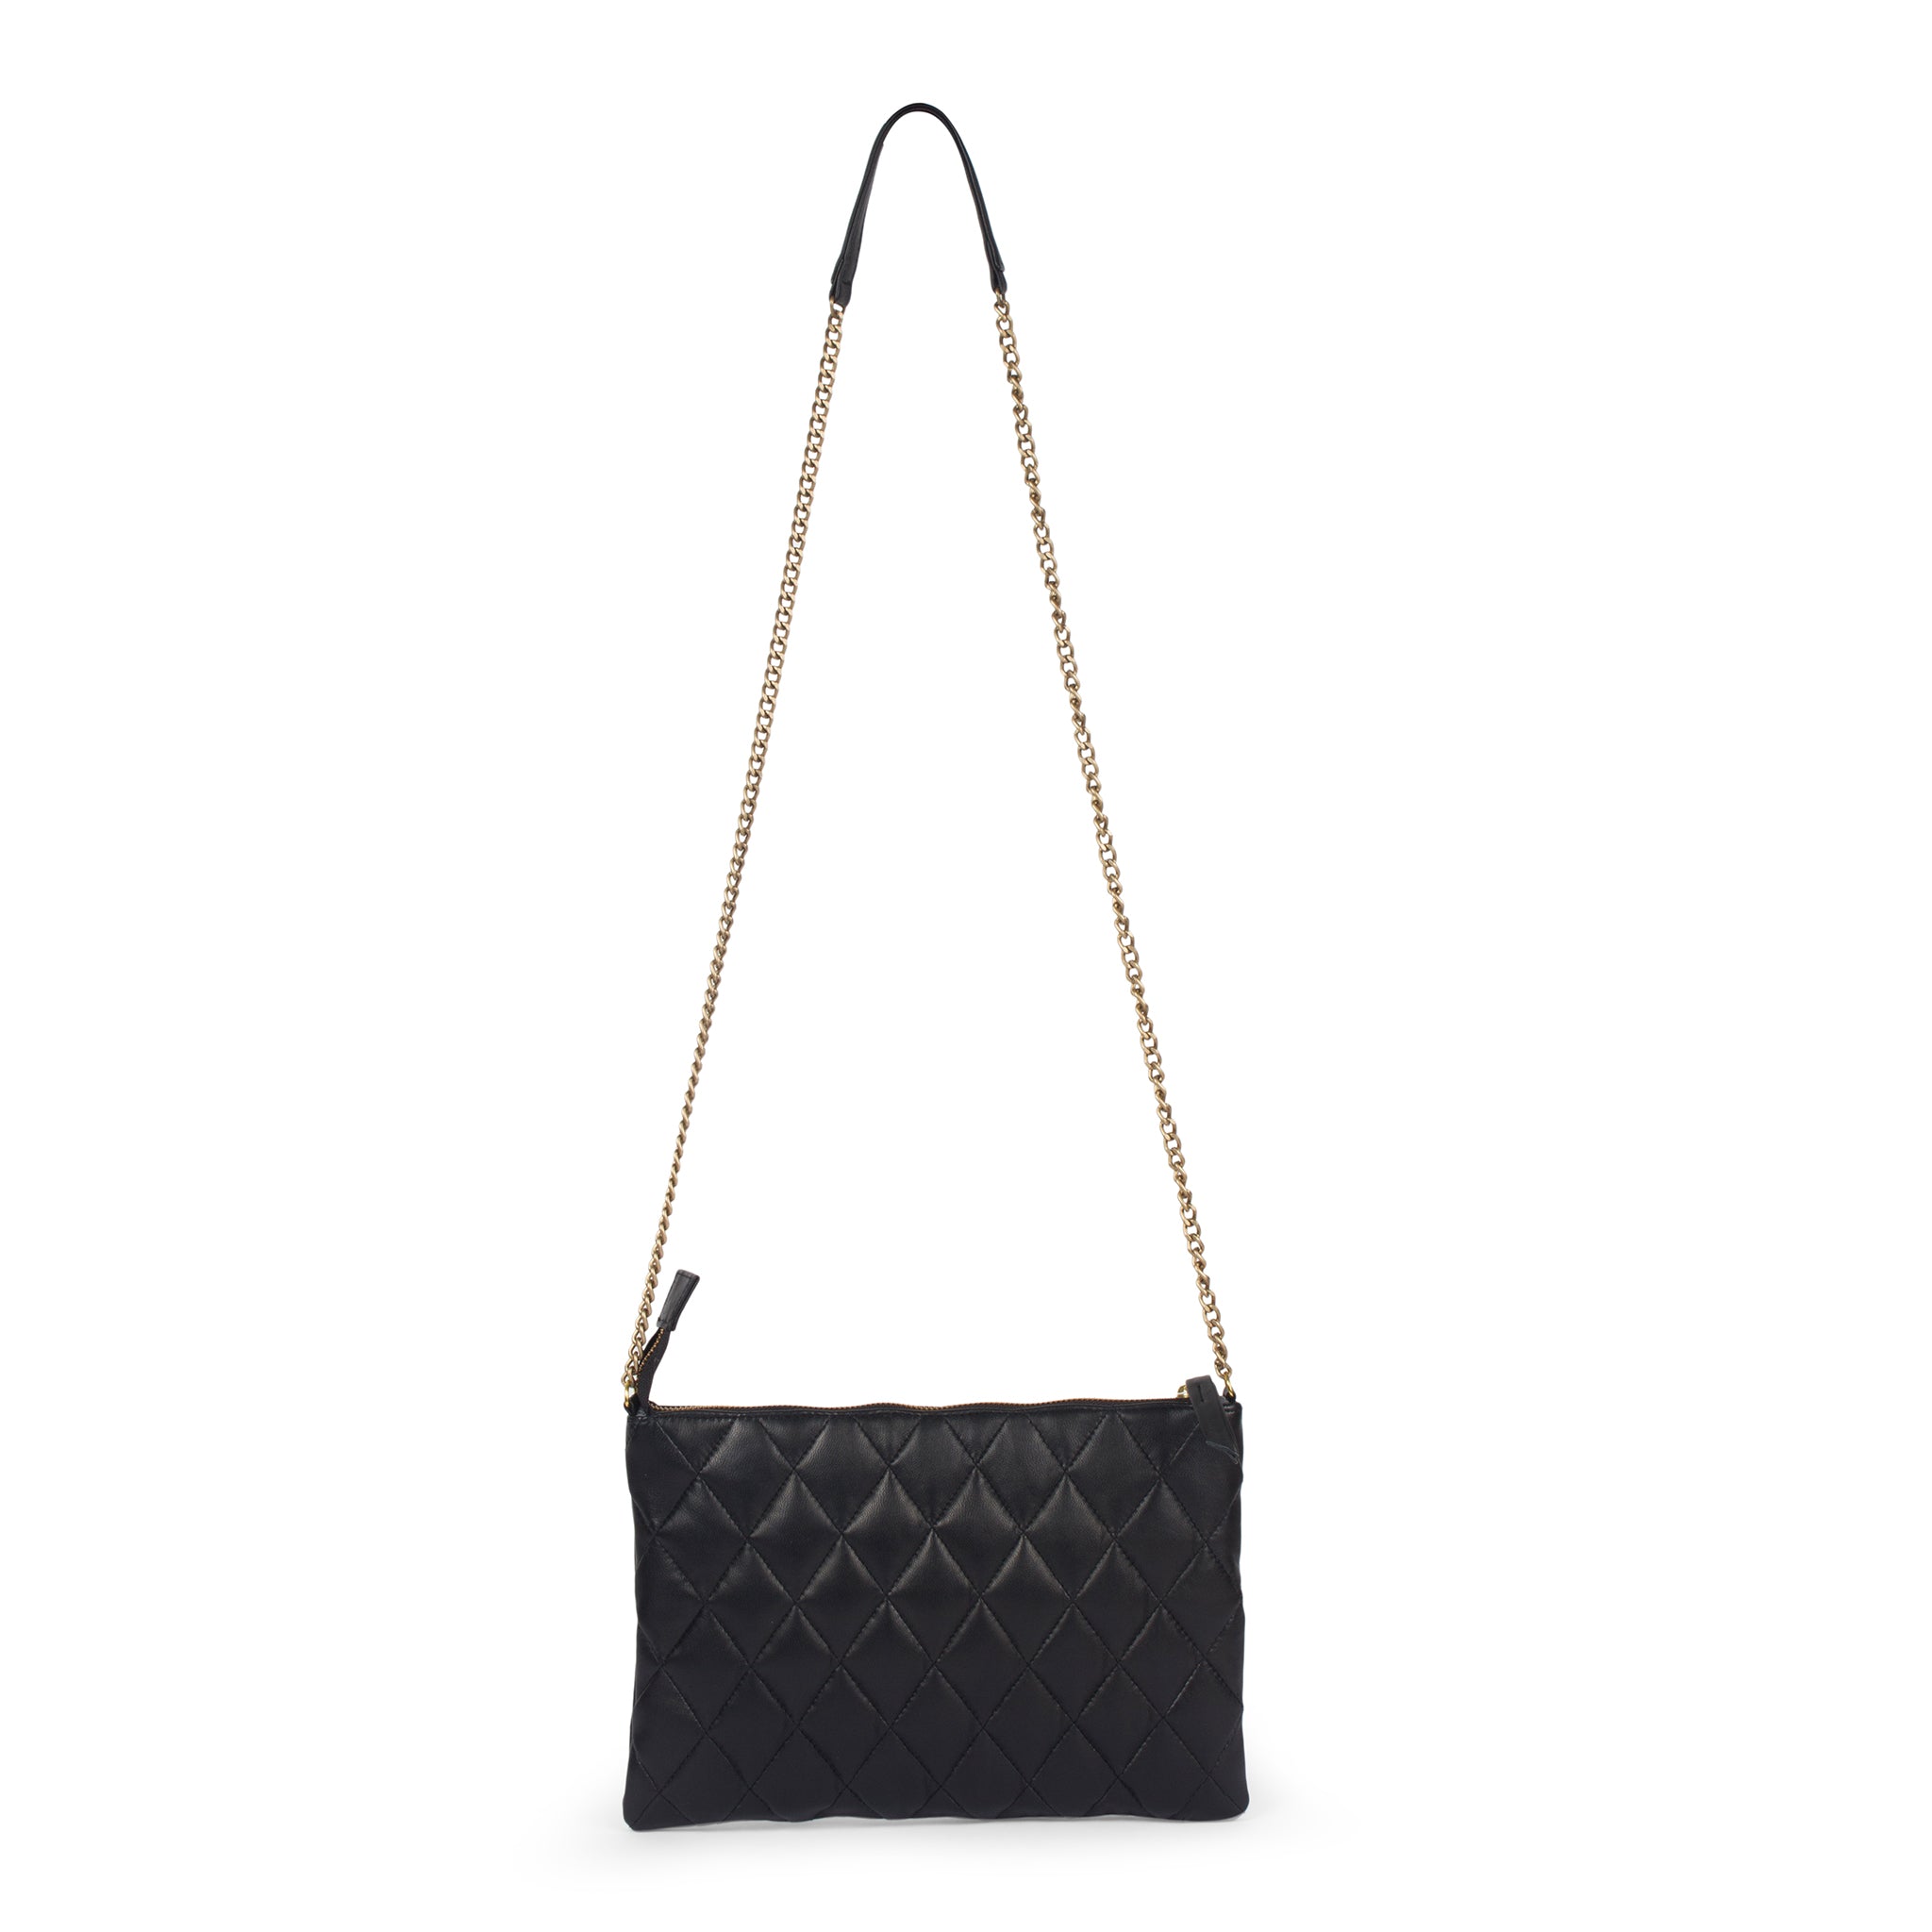 black leather clutch; bags and purses; black quilted leather bag; mz wallace quilted leather metro clutch bag.; black mz wallace quilted leather metro clutch bag; crossbody quilted clutch bag; black crossbody quilted bag; black matelasse leather bag; black matelasse crossbody handbag